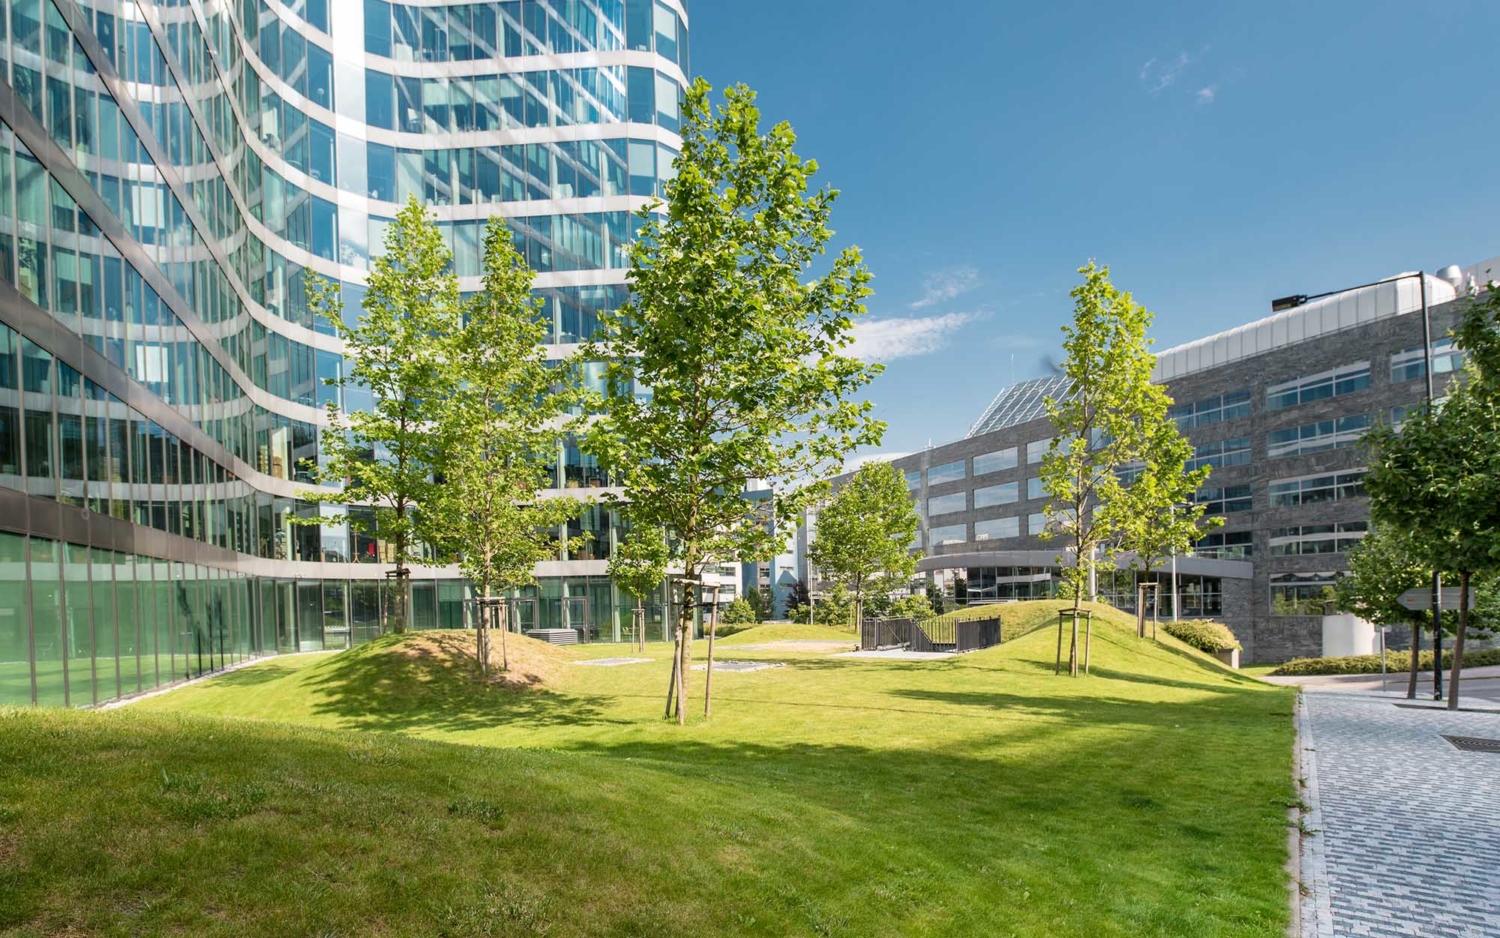 Corporate Center landscaping with tall buildings